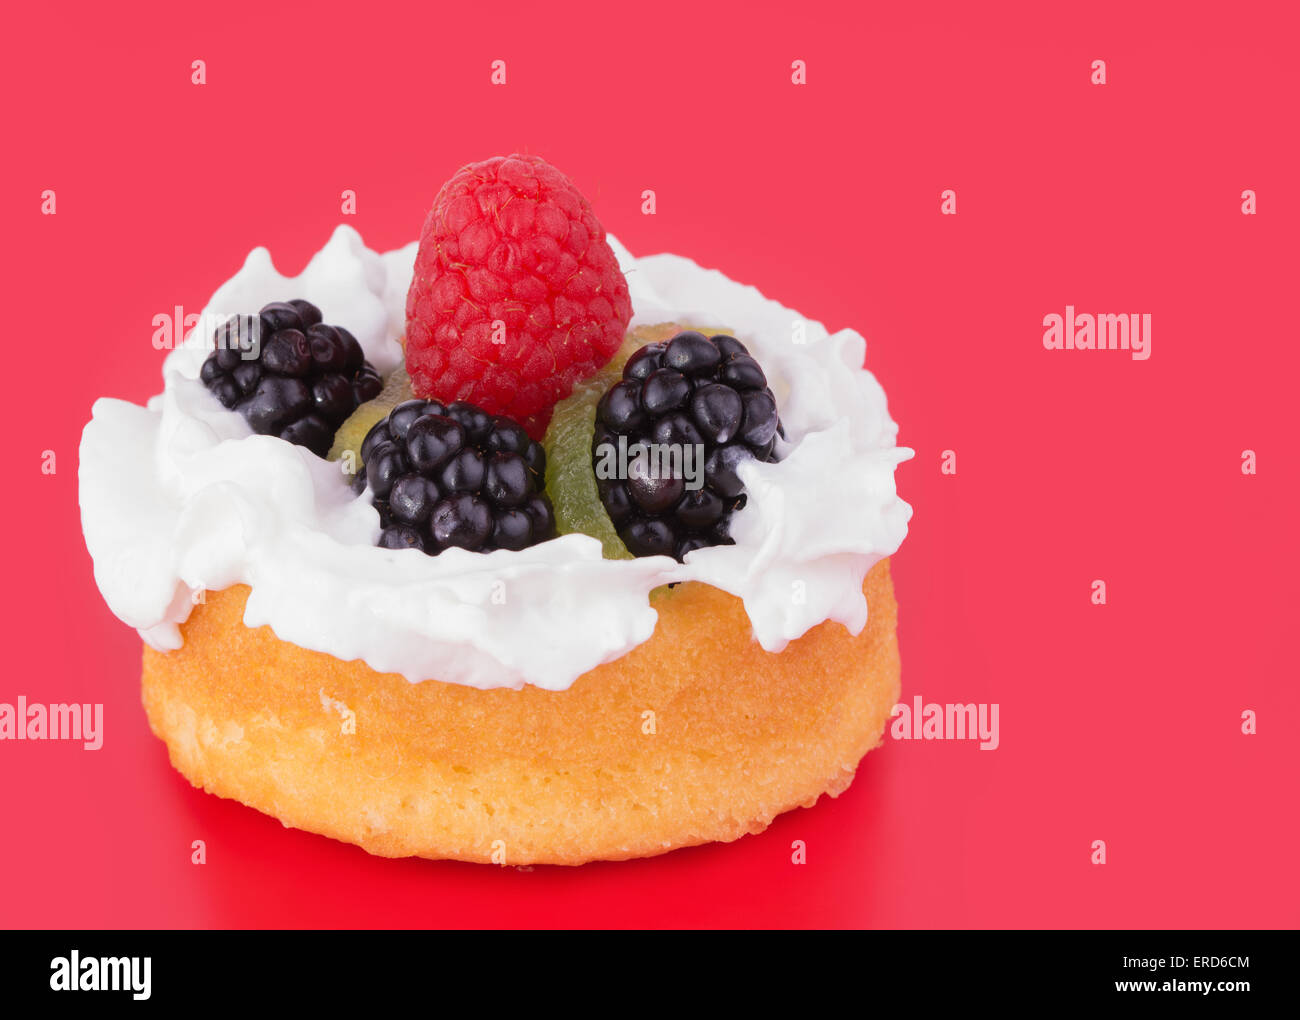 Blackberries, Kiwi, Raspberry and whipped cream topping a dessert shell, on red background Stock Photo